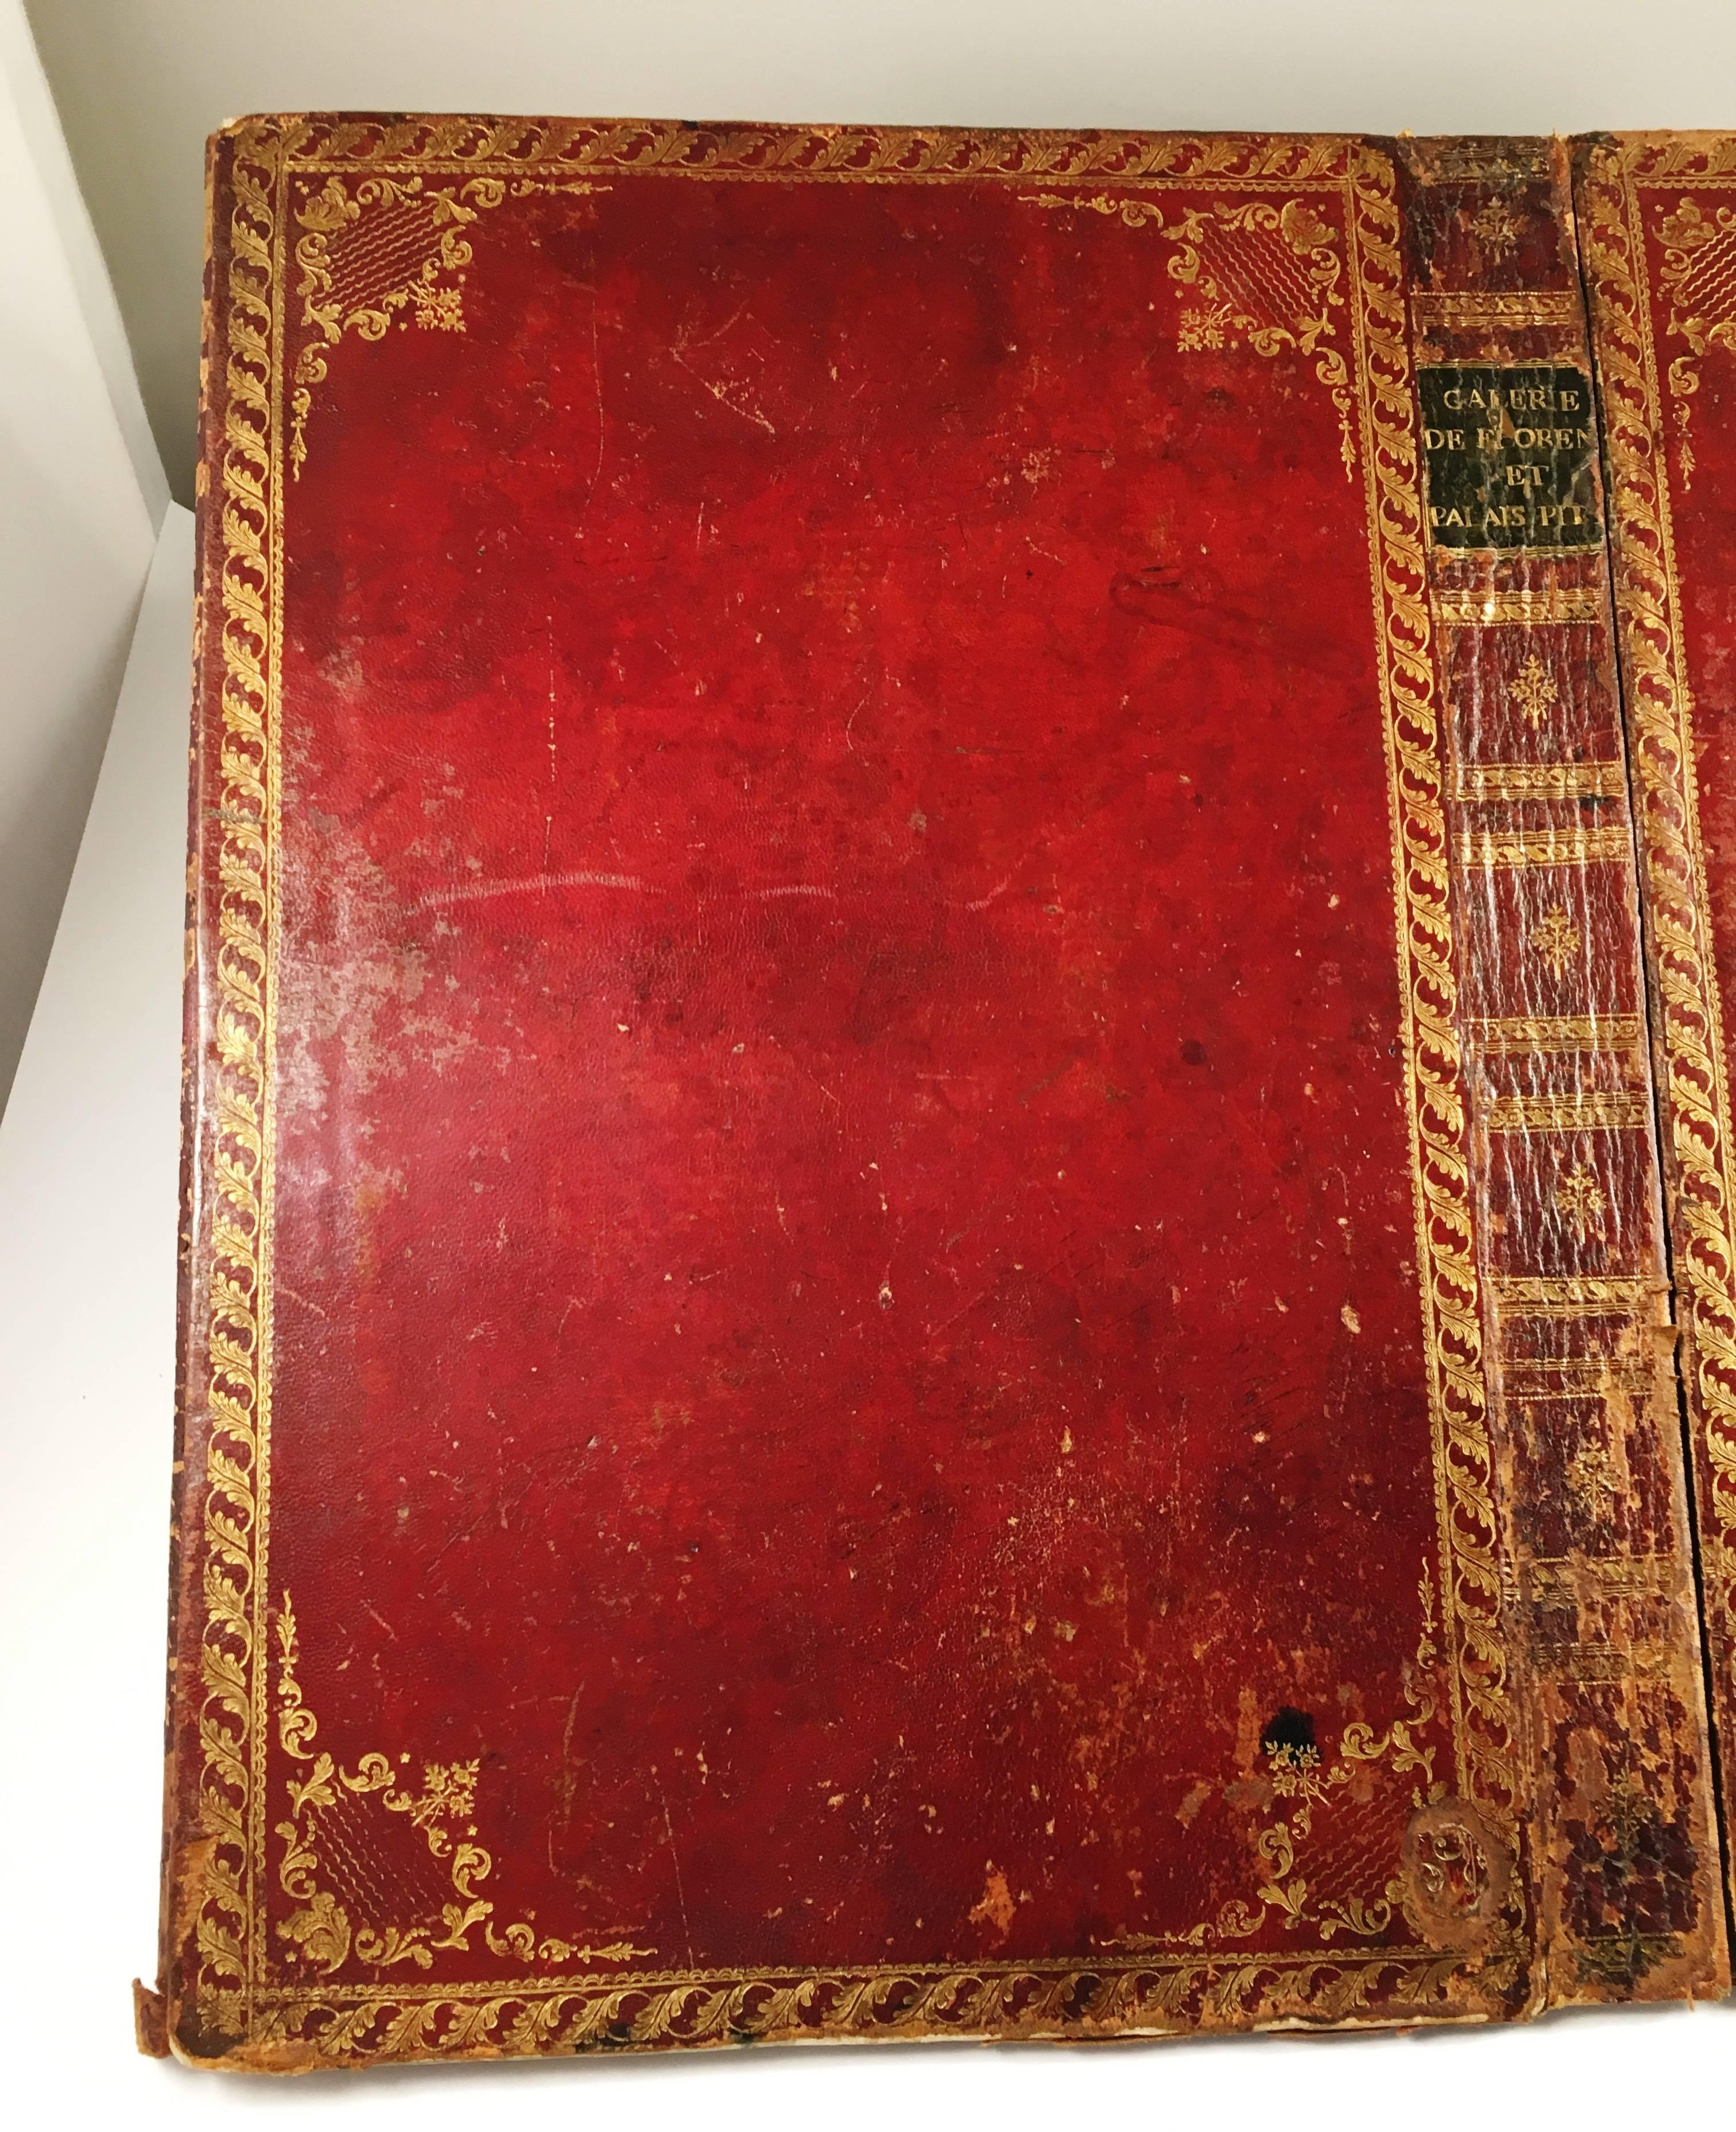 A large size red leather desk blotter from the Louis XV period France, circa 1770, created from the cover of a large Italian folio, the vivid color of the contrasting ox blood red leather and moss green leather on the cover is stunning, with gold